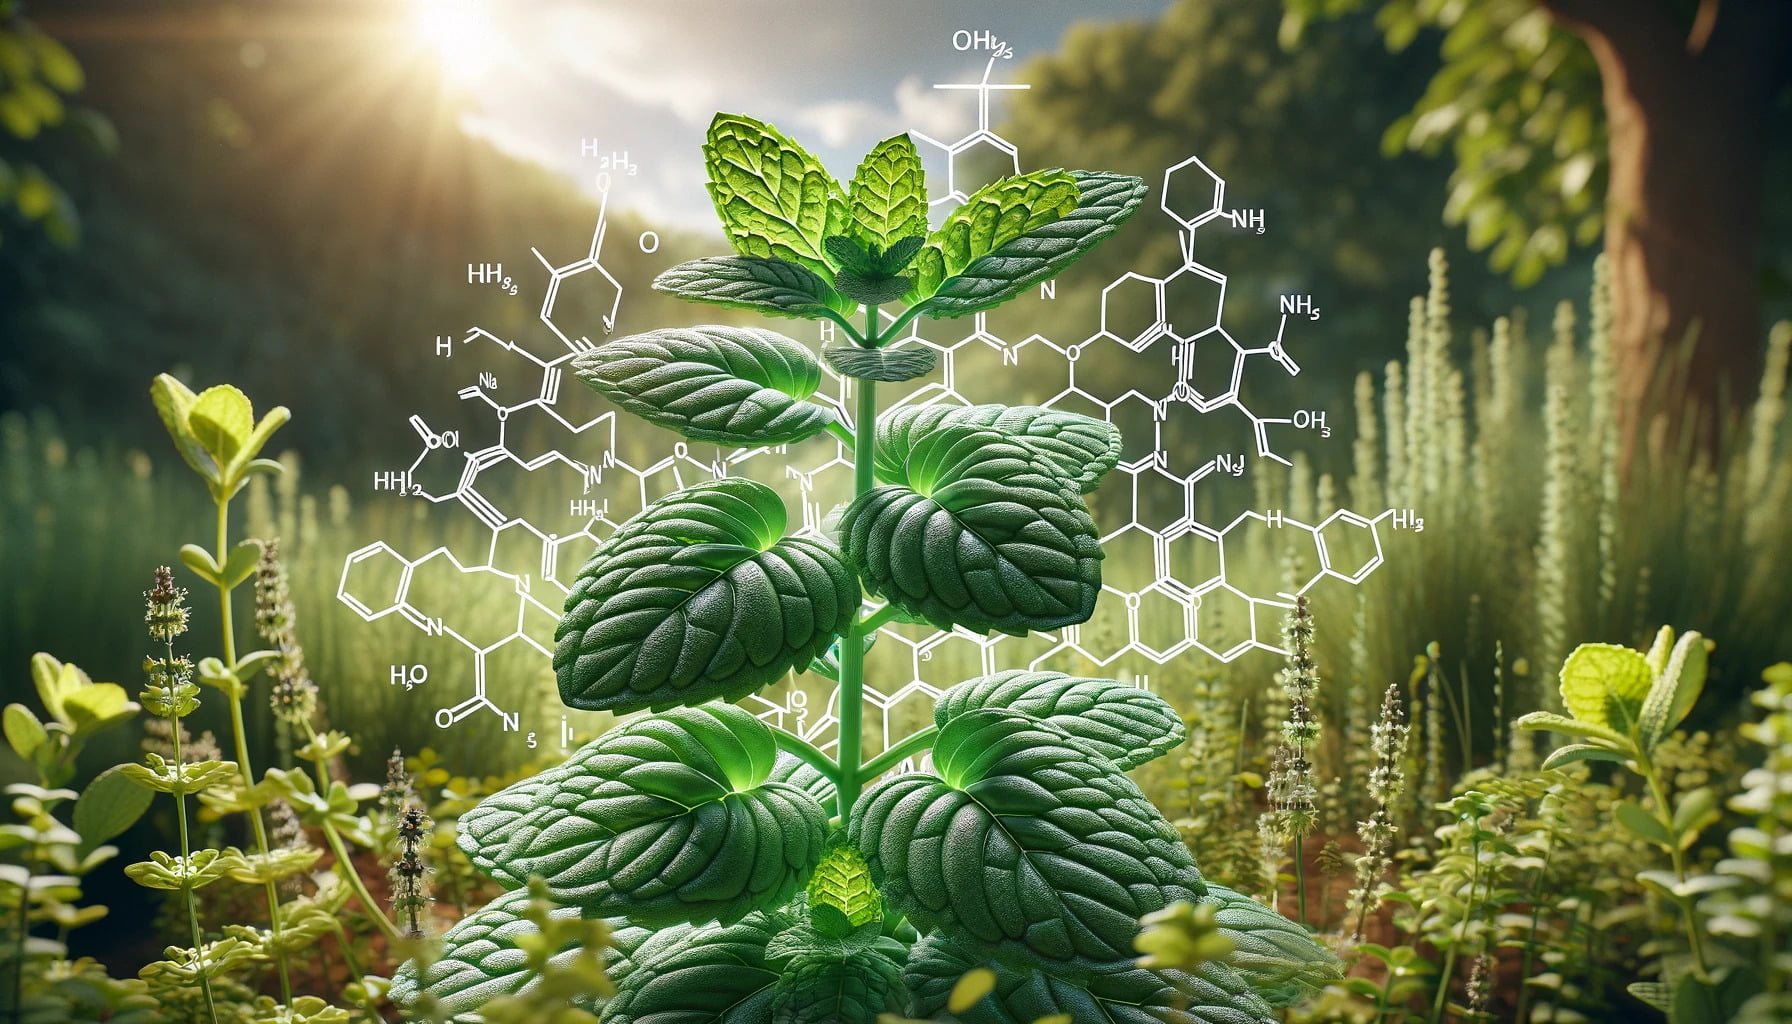 A photorealistic image of a peppermint plant in a landscape format, artistically incorporating its molecular structure. 